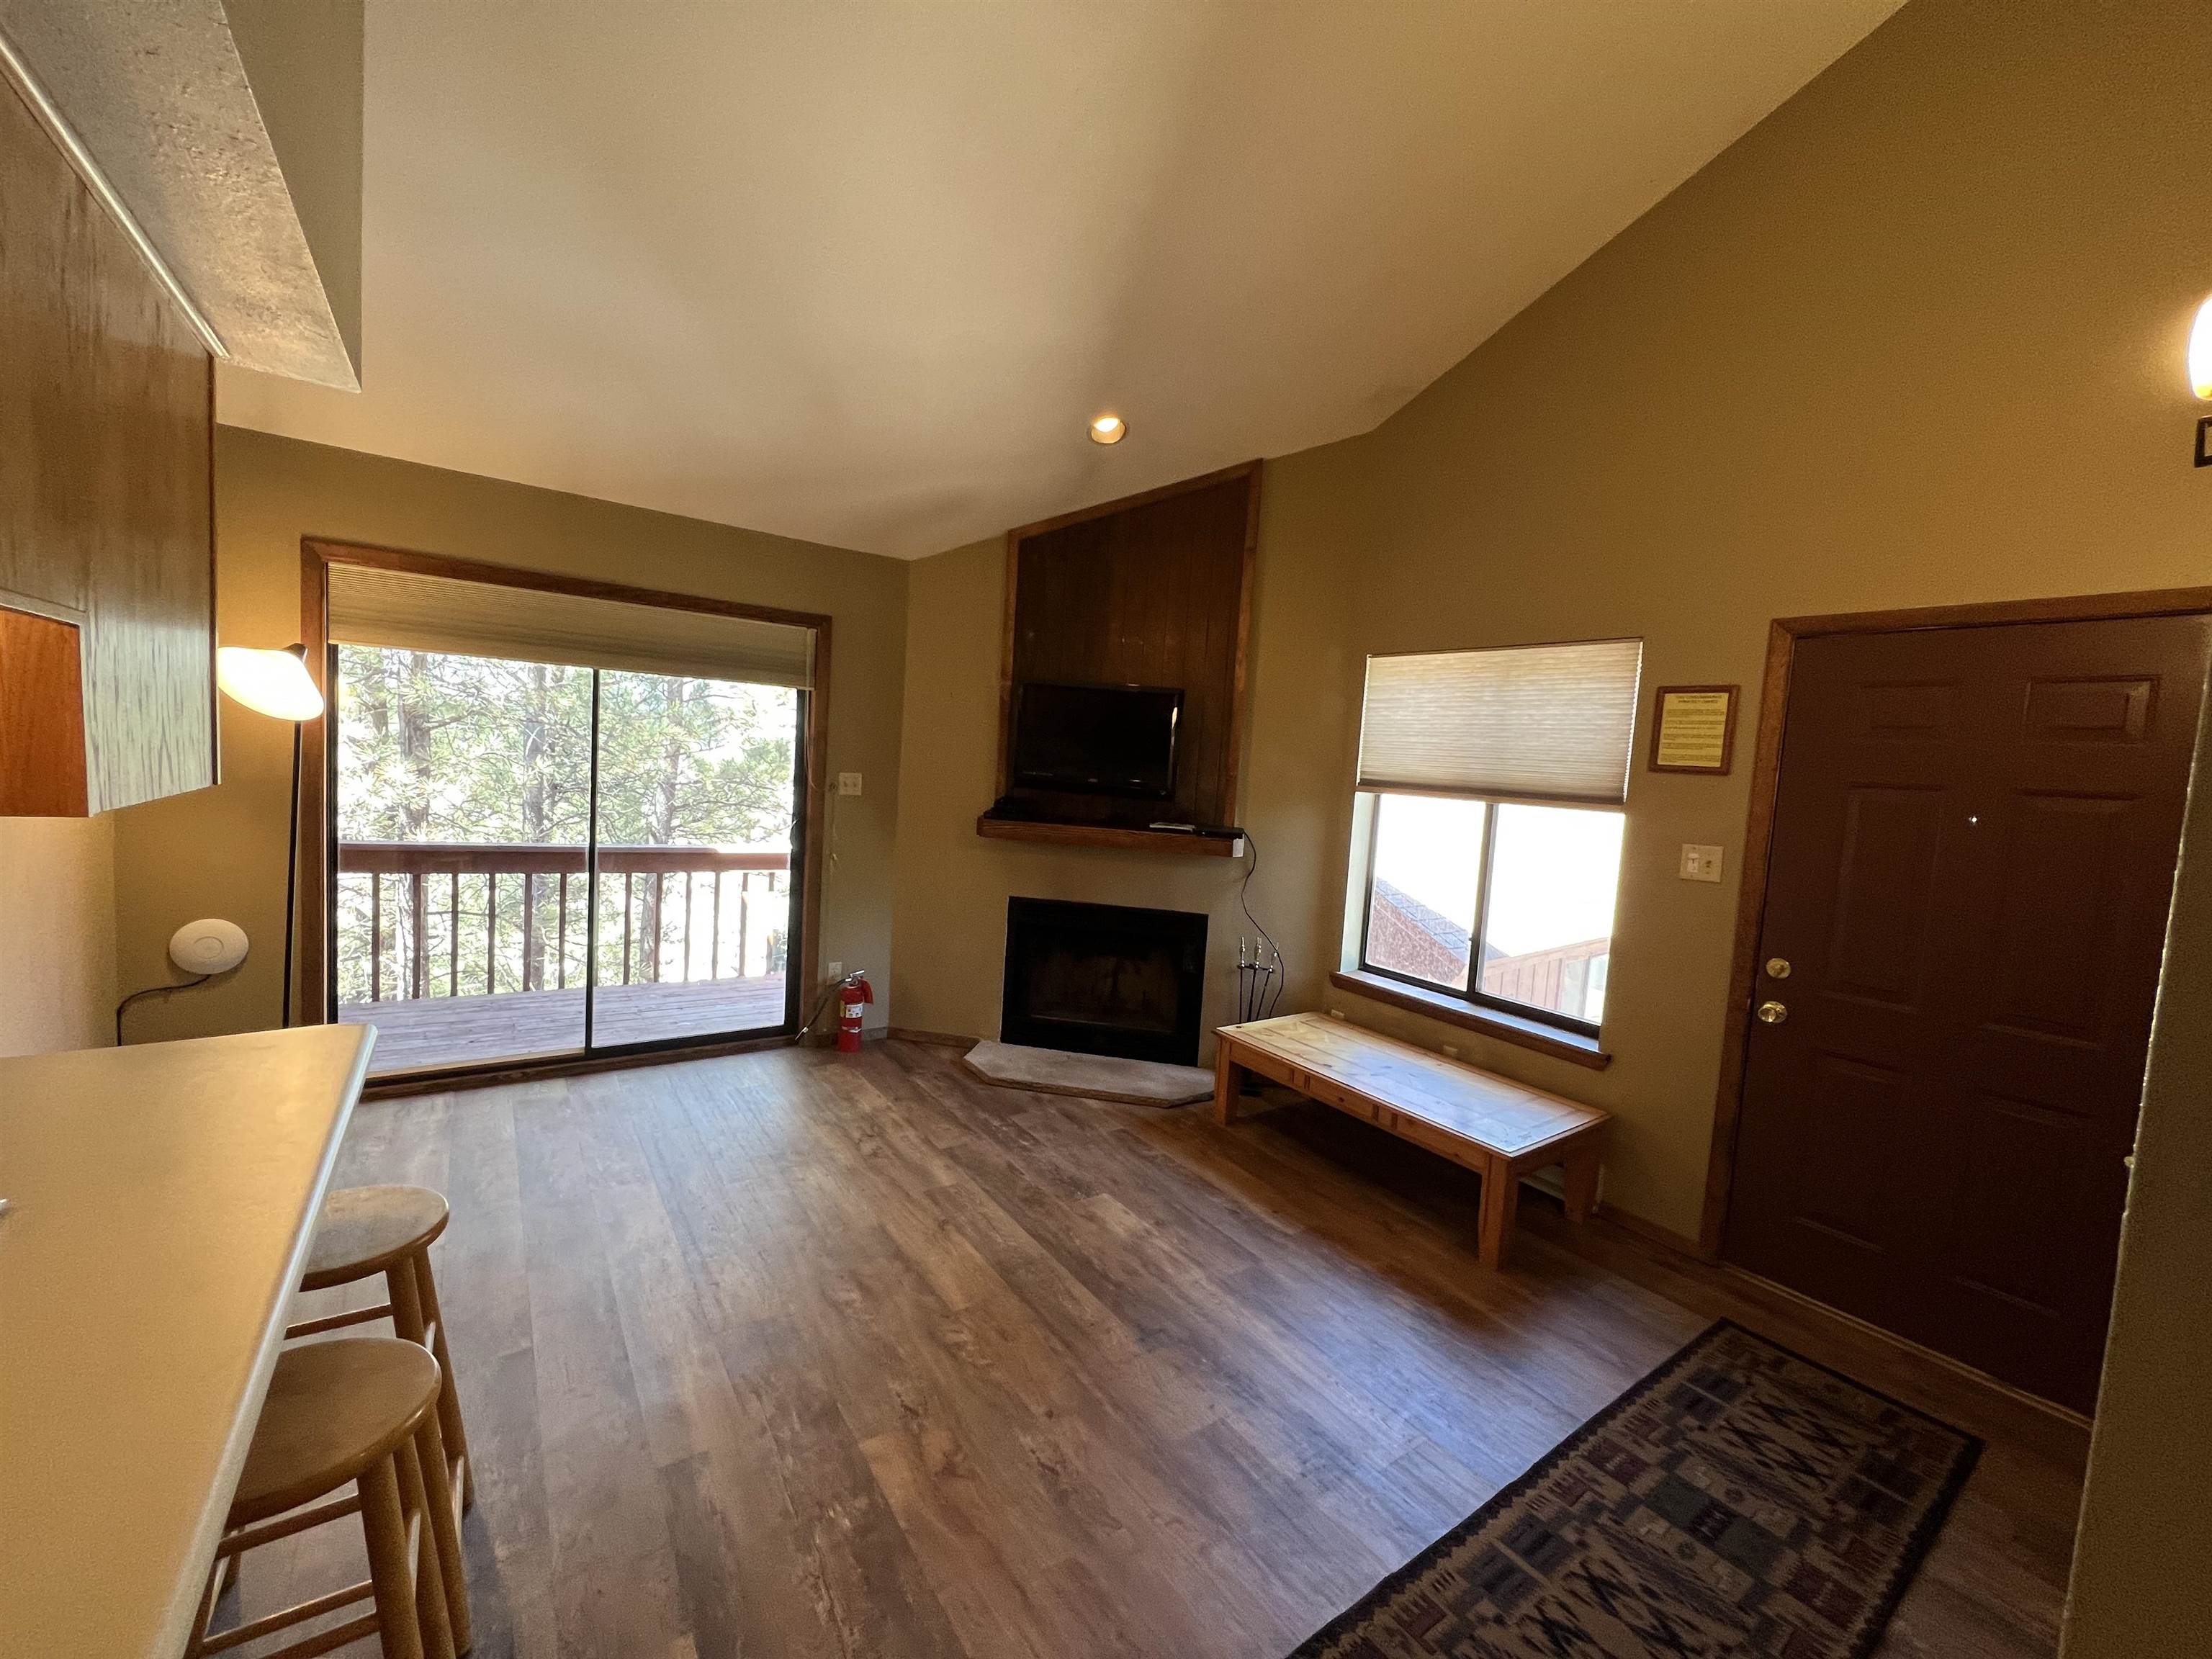 83 Vail Ave, ANGEL FIRE, NM 87710